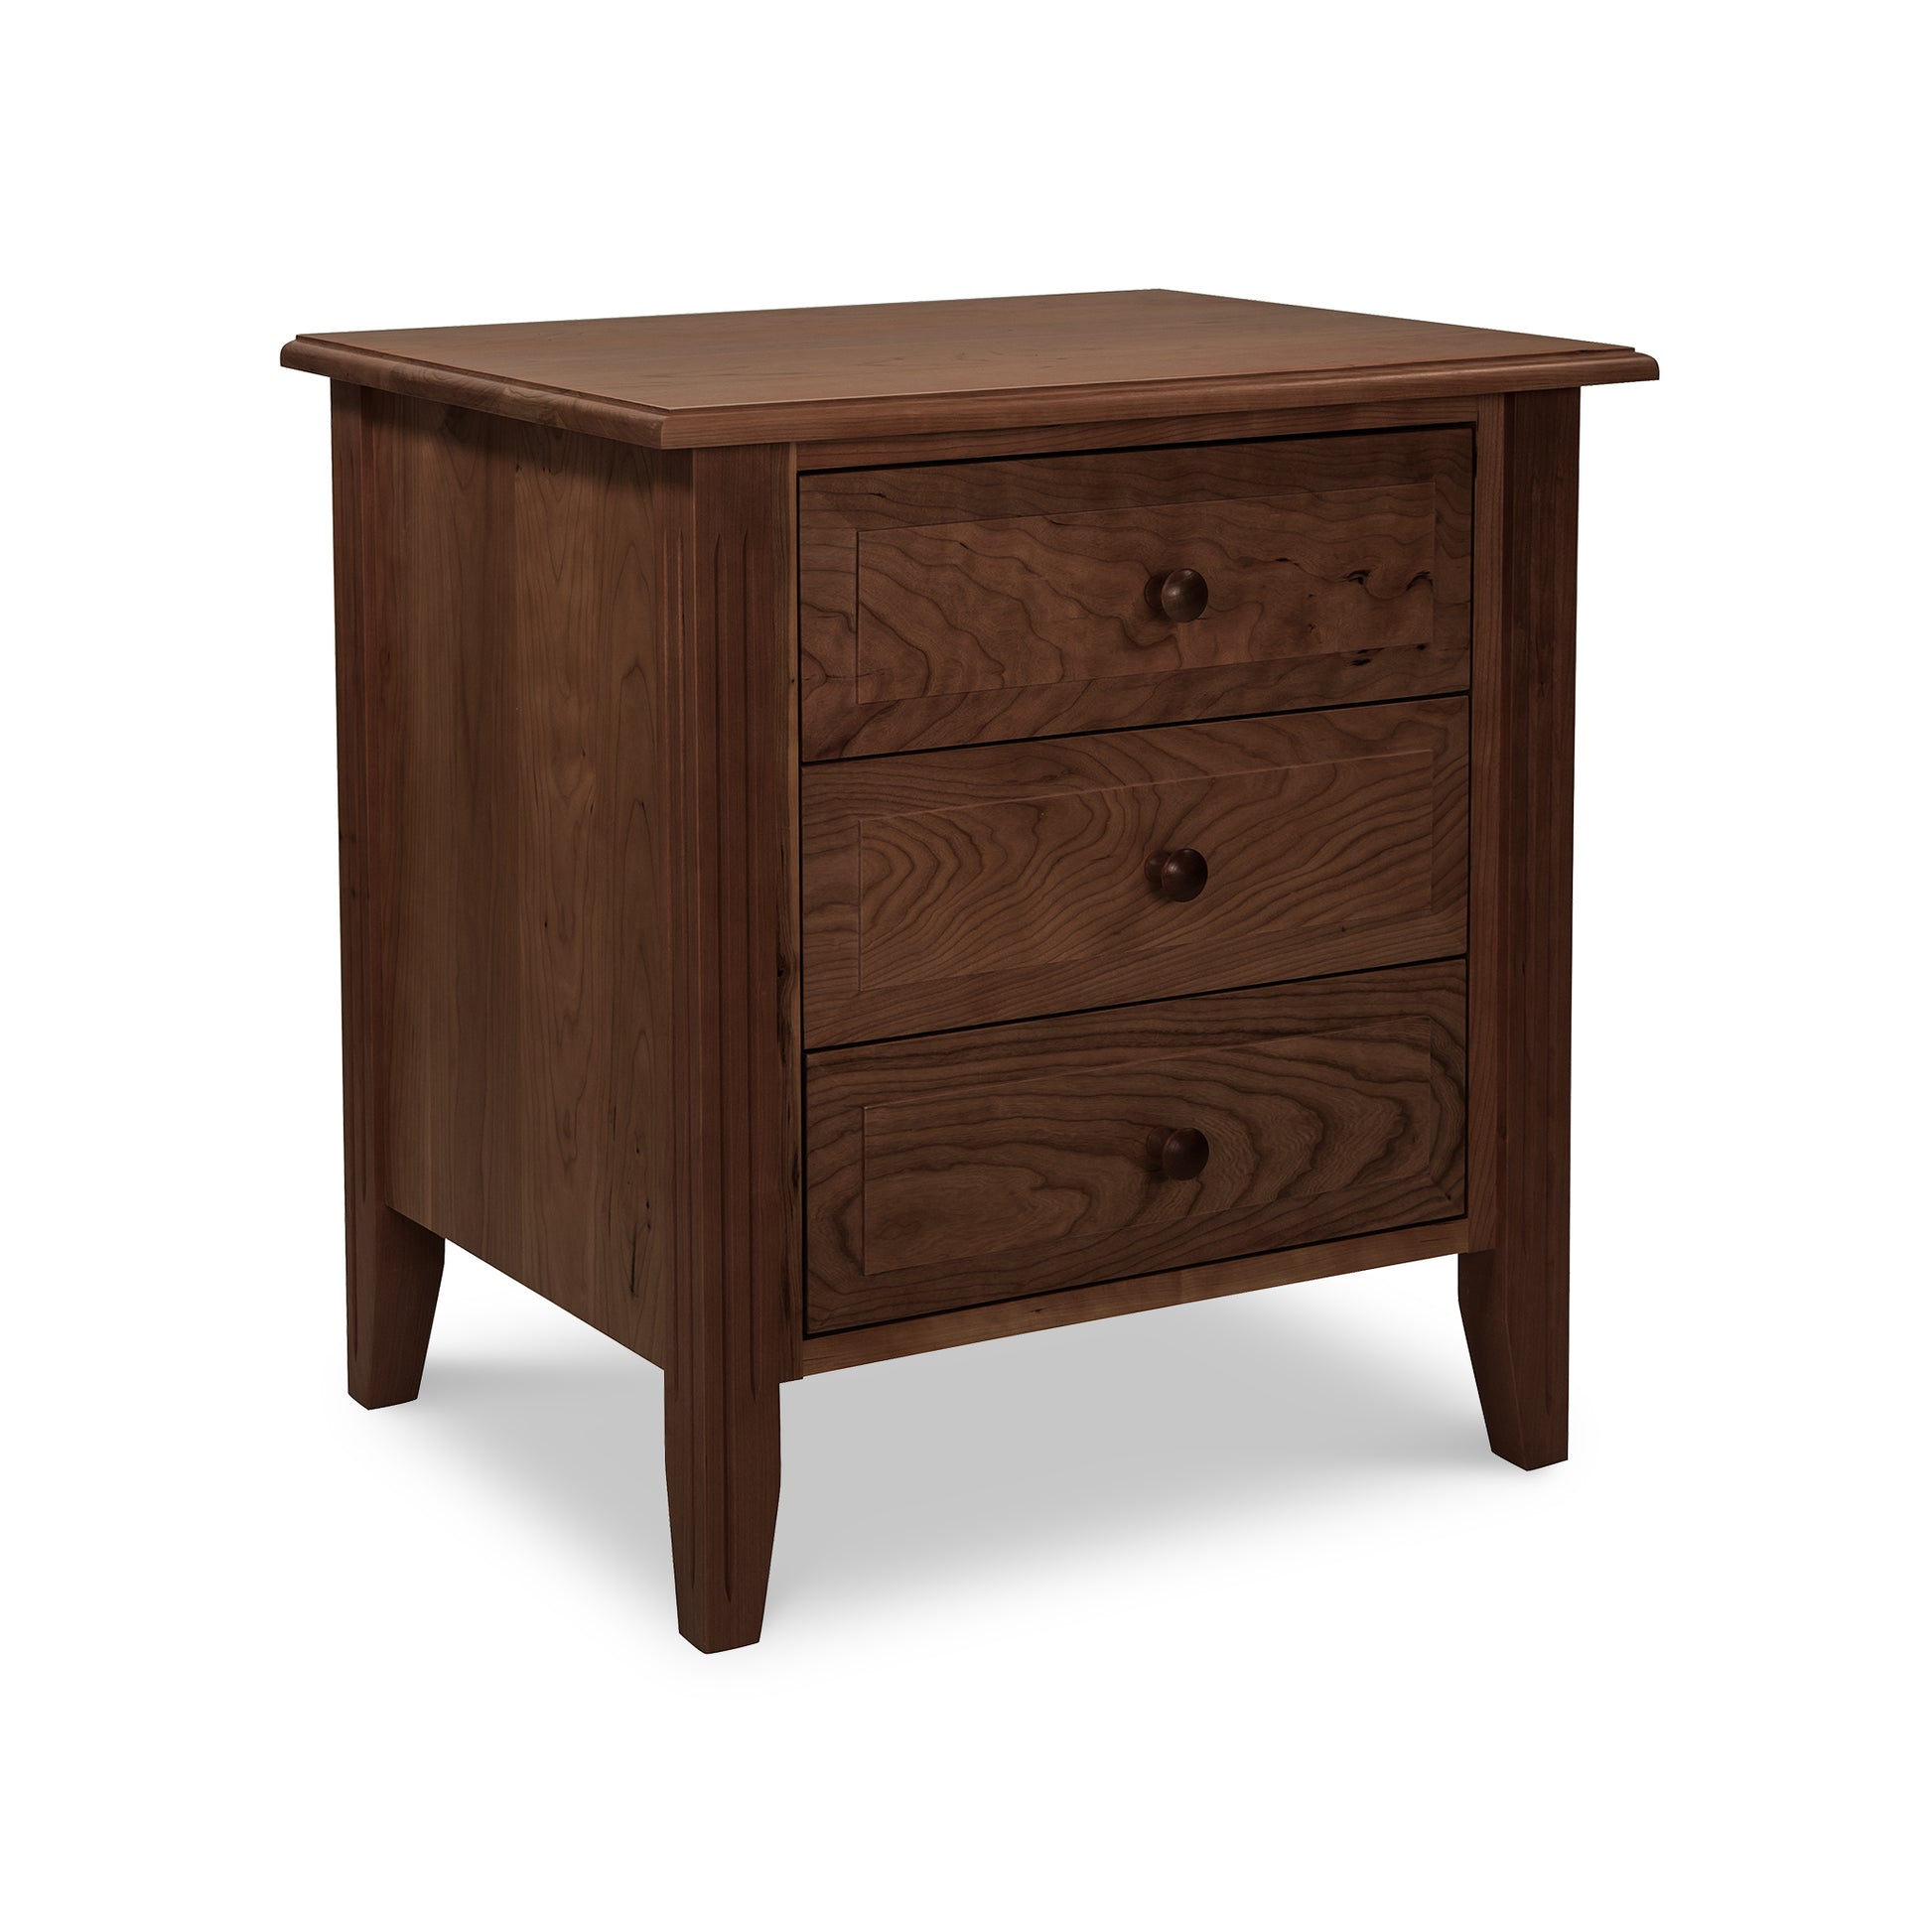 A Renfrew Shaker 3-Drawer Nightstand by Lyndon Furniture with fluted legs on a white background.